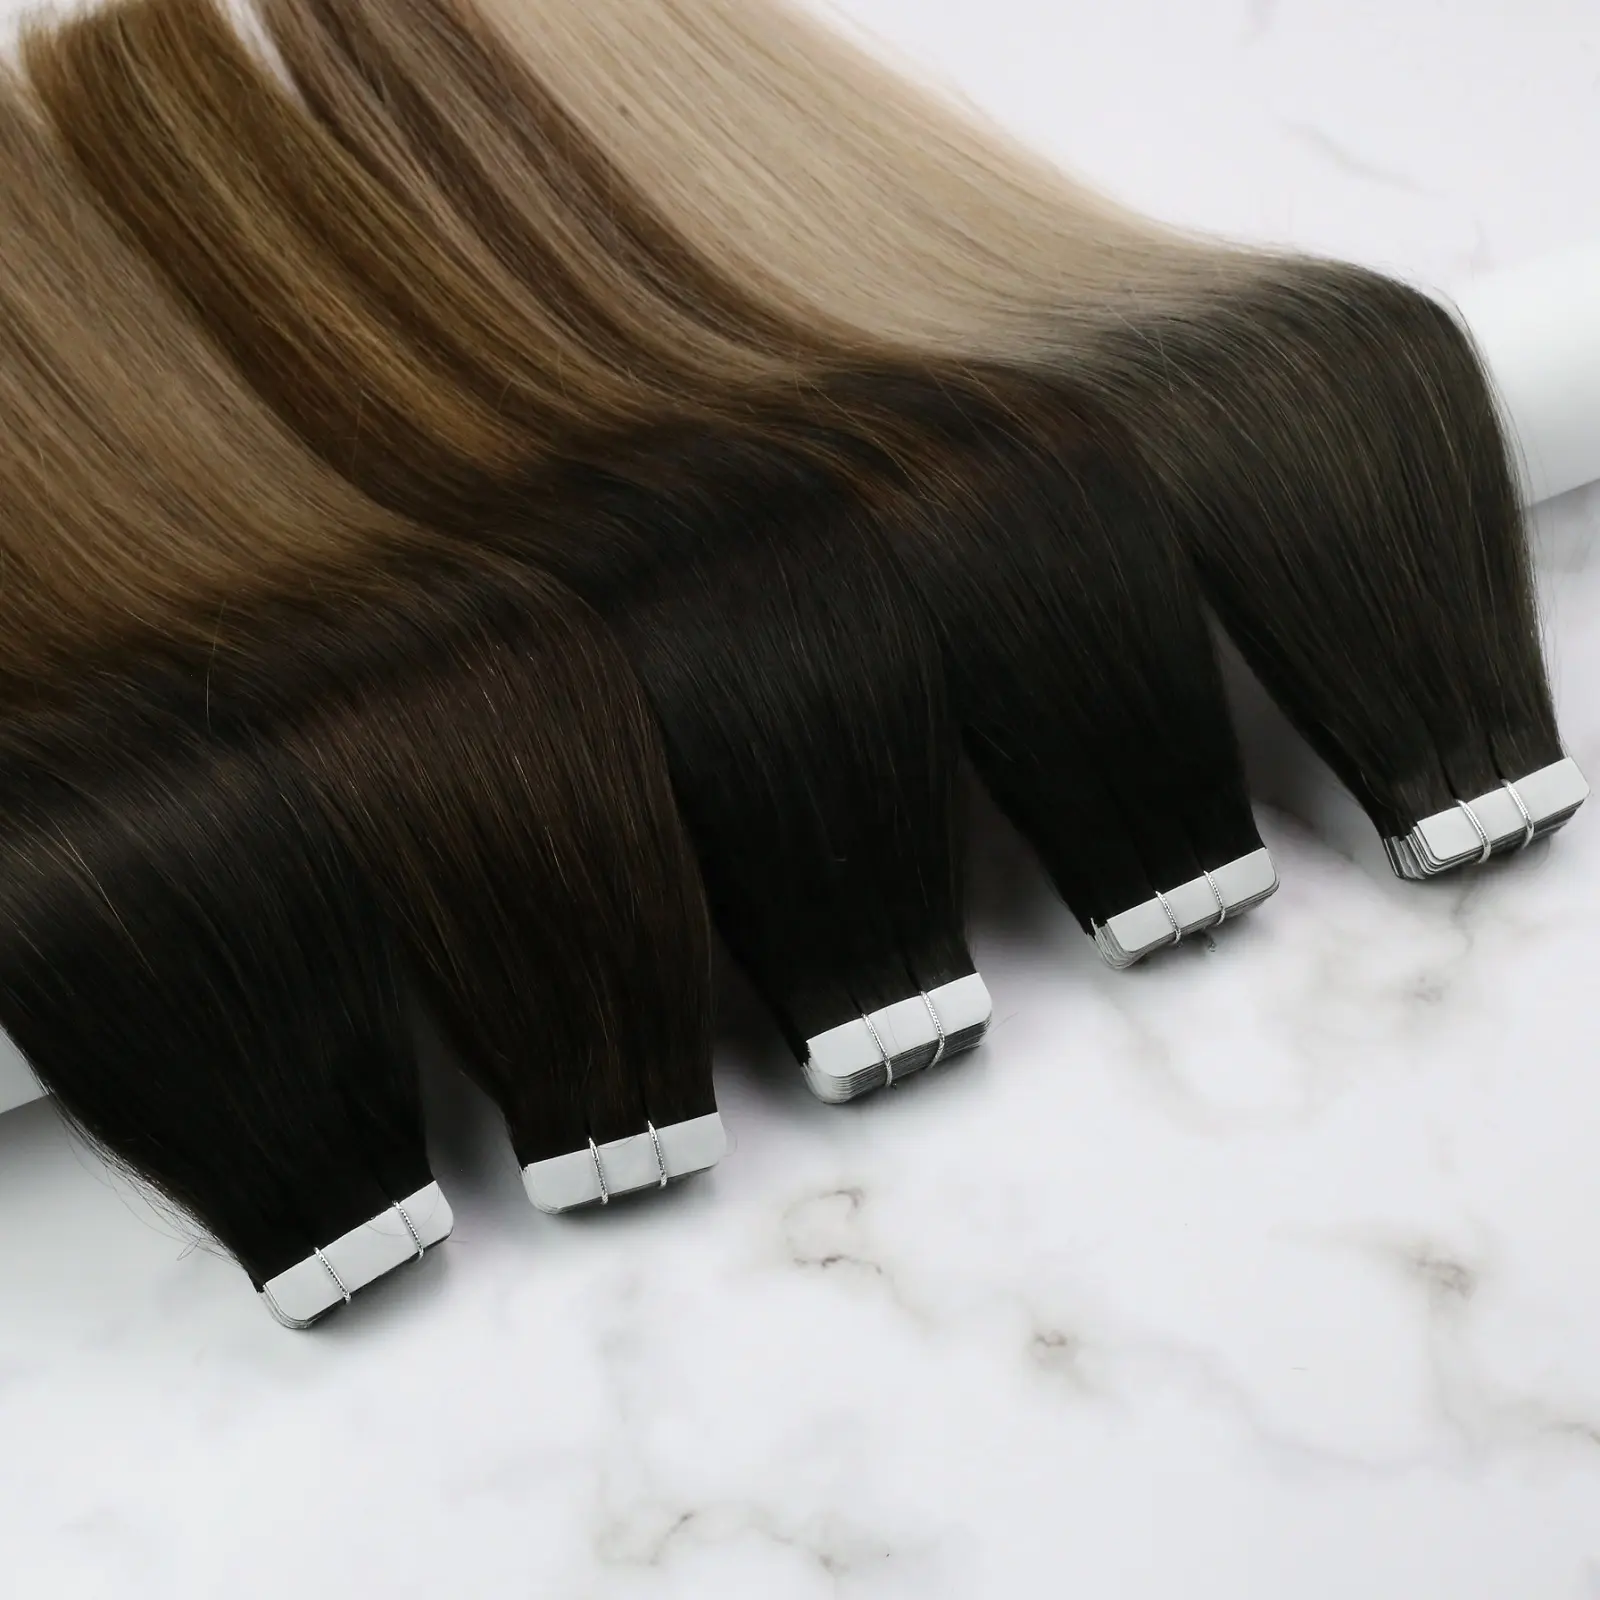 Full Shine Big Discount Stock Hair Colors Cheap Price Long Lifespan Tape in Remy Hair Extension